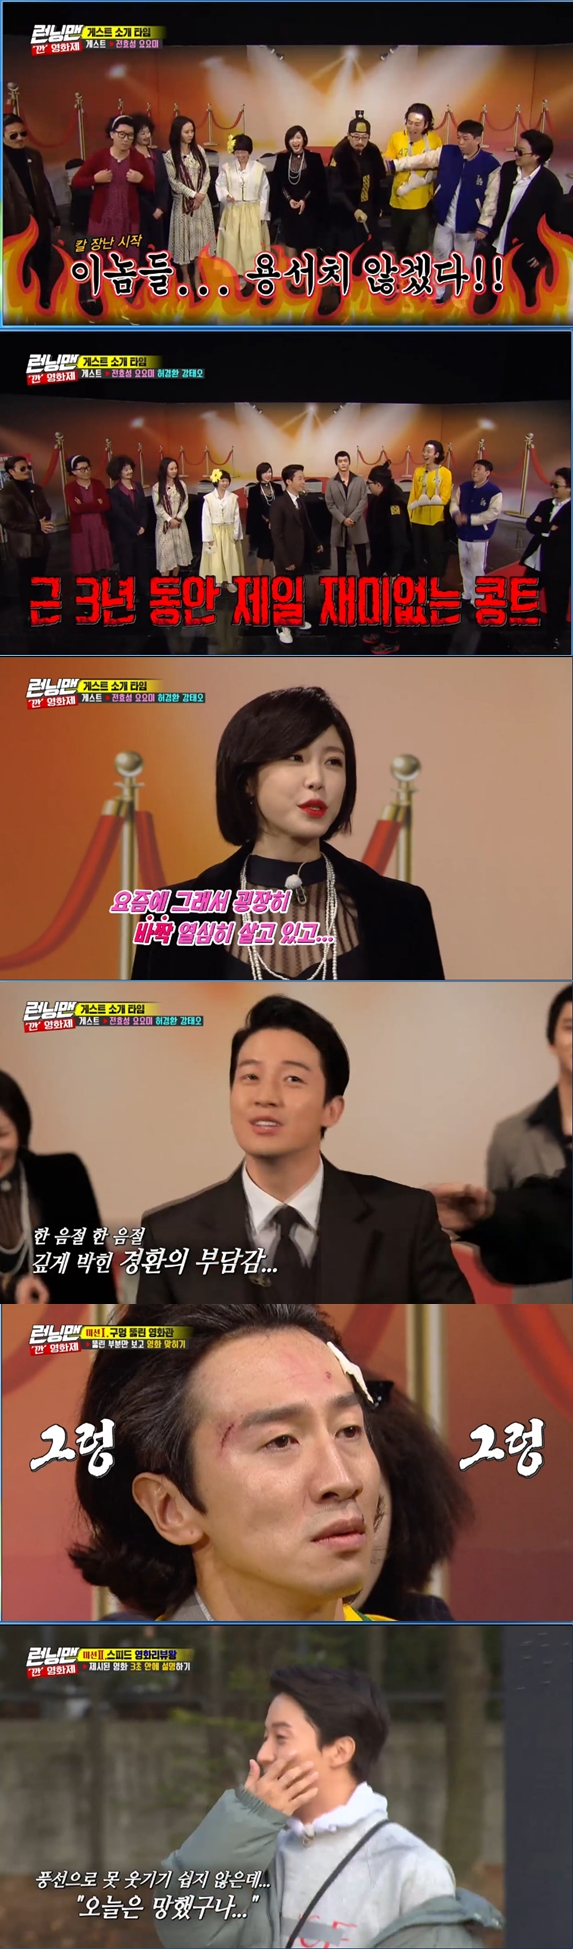 Yomi and Jun Hyoseong have been questioned by members.In the SBS entertainment program Running Man broadcasted on the night of the 29th, the members turned into new Stillers and showed Kang Film Festival Race.The crew called the members and informed them that they would do the Kan Film Festival Race this week.Members had to pick one of the numbers given by the crew, and each number had a neo-Stiller character in the film; male members had to pick eight numbers and female members had to choose from four.Lee Kwang-soo was Choi Min-sik of I saw the devil, and Yoo Jae-Suk dressed up as a contemporary.However, among the characters that male members had to choose, there was Kim Hye-ja character of Mother.The owner of the number was Ji Suk-jin, and when he saw him dressing up, Haha laughed, saying, Its Grand Mother.One of the numbers the female members then chose was the Oh Dae-sik character of Old Boy. The main character of Oh Dae-siks character was Jeon So-min.The members who saw her dressed up could not bear the laughter.Each dressed up member to fit the race theme gathered in one place for the opening; Yoo Jae-Suk announced the recent situation that Kim Jong-kook started a national concert.Haha said, I went to the concert as a guest, but I was really sad. Kim Jong-kook did not hide his regrets that Kim Jong-kook called the song he sang with him in the running project.Kim Jong-kook laughed, saying, I told him to be with Haha around, but he just called me alone.Haha said, If you do, why did you call me? Yoo Jae-Suk, who was looking at it, revealed another atrocities of Kim Jong-kook.He said, Kim Jong-kook and Jeon So-min both sang the song of the war.Yomi, Jun Hyoseong, Heo Kyung-hwan and Kang Tae-oh came out as guests to join the Running Man Kan Film Festival Race.Heo Kyung-hwan presented an impromptuly prepared contest with Kang Tae-oh; the members reaction was uncool.Eventually, Yoo Jae-Suk laughed, saying, It was the most uninteresting contest Ive seen in the last three years.Jun Hyoseong, who first appeared on Running Man in his debut 11 years, revealed his sadness to the production team and members.When Yoo Jae-Suk introduced Jun Hyoseong, Lee Kwang-soo surprised everyone by saying, Its my first appearance.Jun Hyoseong said, I did not call it once. Yoo Jae-Suk apologized, saying, We are sinners.Heo Kyung-hwan, who has been twisted from the opening, has begun to take a serious burden.Yoo Jae-Suk said, When I came out a month ago, I sang Forty Five song, but it was edited. It was not so funny at the time.Ill give you one more chance, so try to be fun, Yoo Jae-Suk said.However, Heo Kyung-hwan called the song of Forty Five with a serious expression saying I am a singer and received the boos of the members again.After the stage, Yang Se-chan laughed, saying, Can you see this on the air?Kang Tae-oh showed off his anti-war charm; Yoo Jae-Suk introduced him and said he was a part of an actor group and that dancing was possible.Kang Tae-oh said, I learned dance but I can not do well.However, when the song of Orange Caramel came out, he turned and danced each neck and surprised all the members.After the recent talk with the guests, the crew showed a video to the members. In the video, it was Bad Access Movie World, and MC interviewed the directors.The directors declared war on the members to go to the Film Festival and take revenge, saying, Why are we scenarios?The members conducted a mission to share the team and get hints: the first mission was a holed cinema. The right answer was to designate one and hit the night.Yang Se-chan, who got the right answer, pointed to Lee Kwang-soo and hit him; Lee Kwang-soo, who went to the right night, had a chance to revenge the next problem.Lee Kwang-soo, who had the chance to hit the second generation, unleashed his anger by properly avenging Yang Se-chan.But immediately Yang Se-chan got the chance to hit the night, and the two continued their only hurt confrontation.Lee Kwang-soo was hit just night and turned into a psycho pass he dressed up.Lee Kwang-soo, who had another chance, hit Yang Se-chan and confirmed that it was the last game, and then pointed to Kim Jong-kook and laughed at the night.In the Upgrade 369 group mission, which was carried out on the move, the members failed to succeed and failed to obtain hints about the director and national actors.The second mission was to hit a movie that a person had a problem with Speed ​​Movie Review King.In the first round, he sent out the suspicious Yomi, Jun Hyoseong and Kang Tae-oh; the three continued to act in the awards, raising doubts from members.